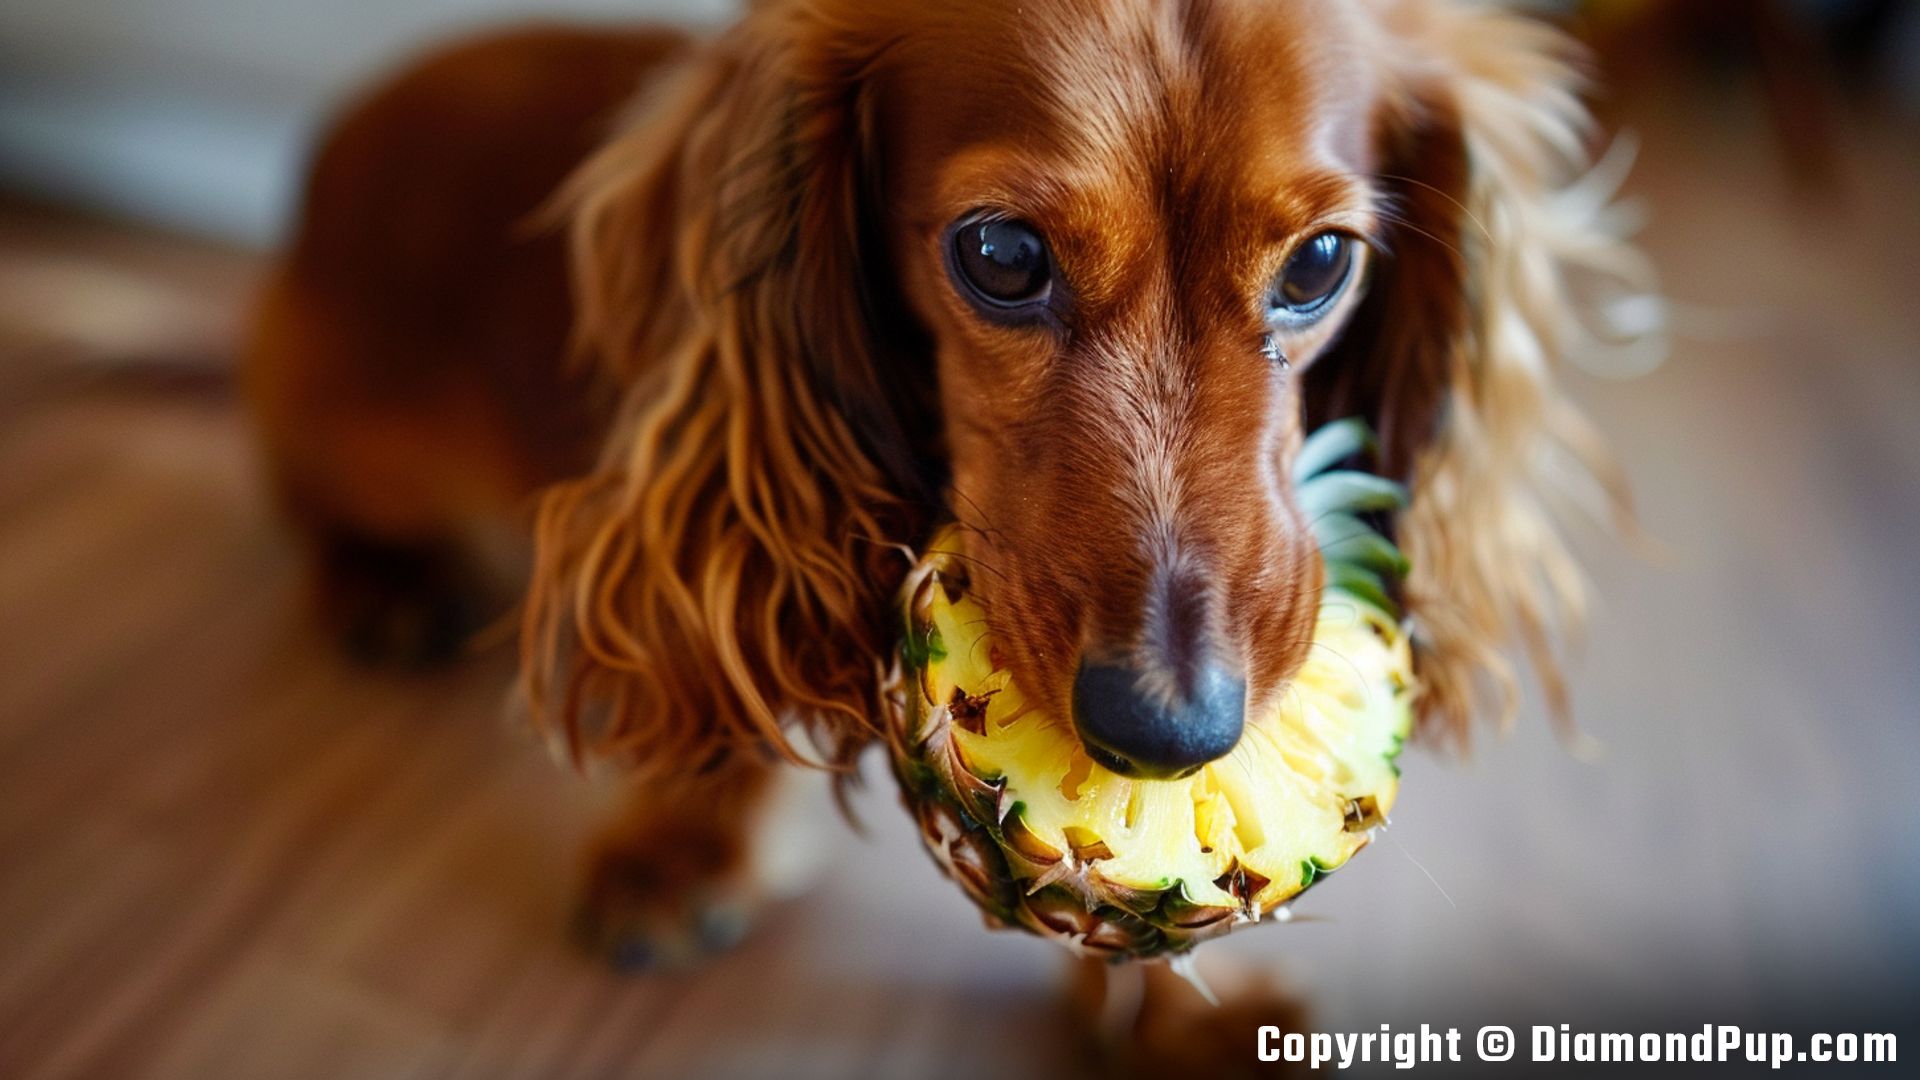 Image of Dachshund Snacking on Pineapple